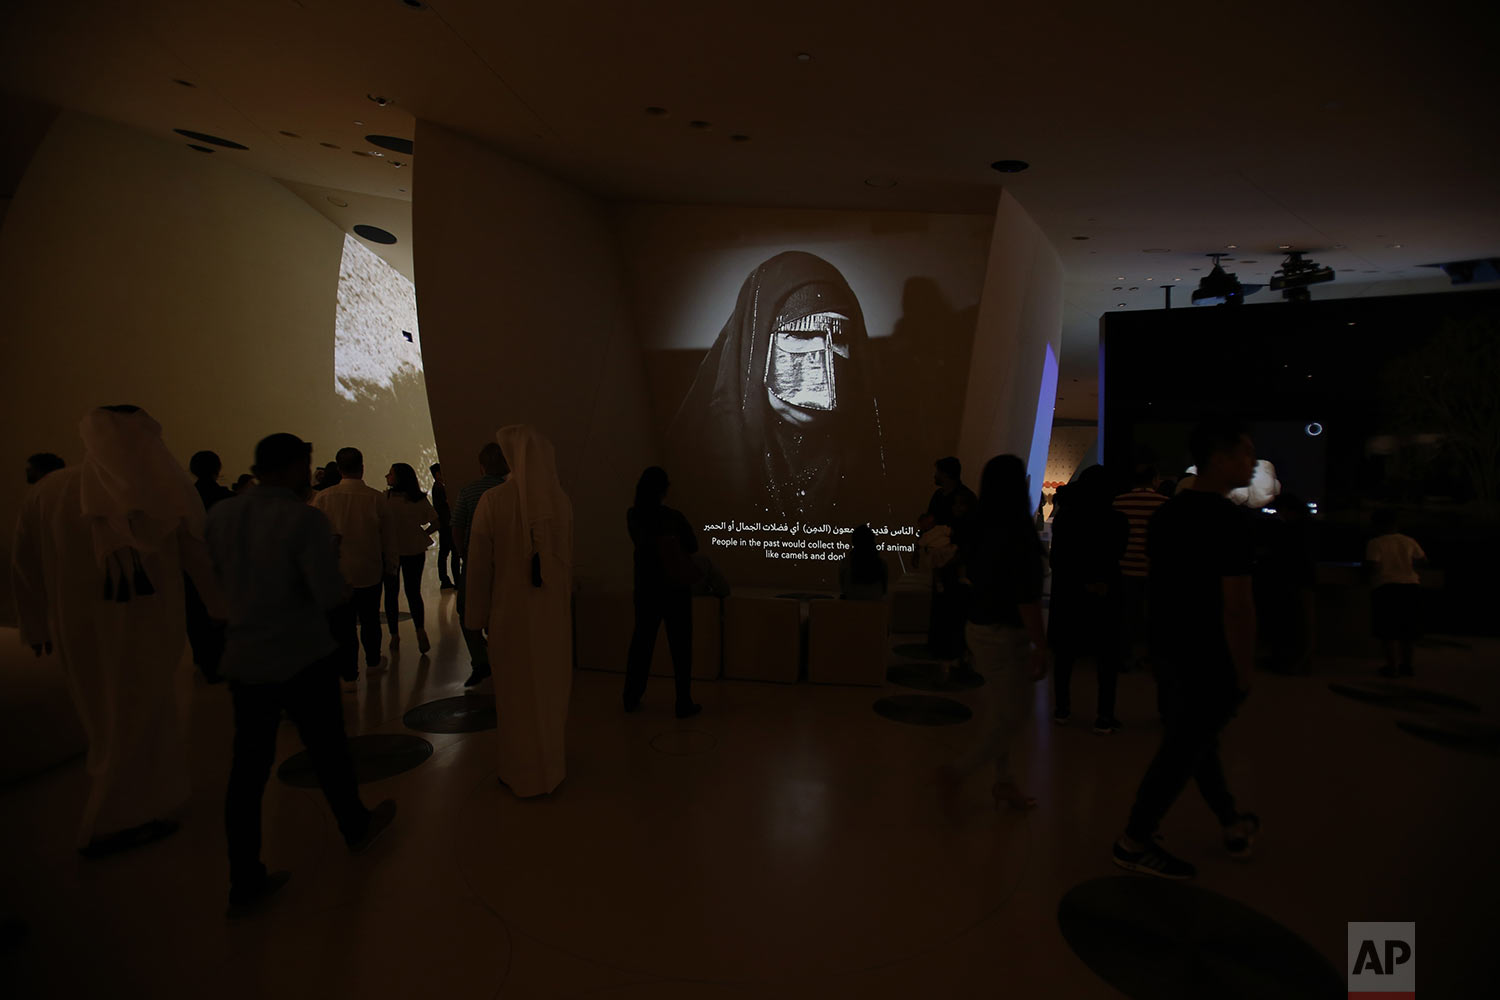  In this Monday, April 22, 2019 photo, people visit one of the galleries with an image of a Qatari woman covered her face with traditional Burqa, at the National Museum of Qatar designed by French architect, Jean Nouvel who got his inspiration from t